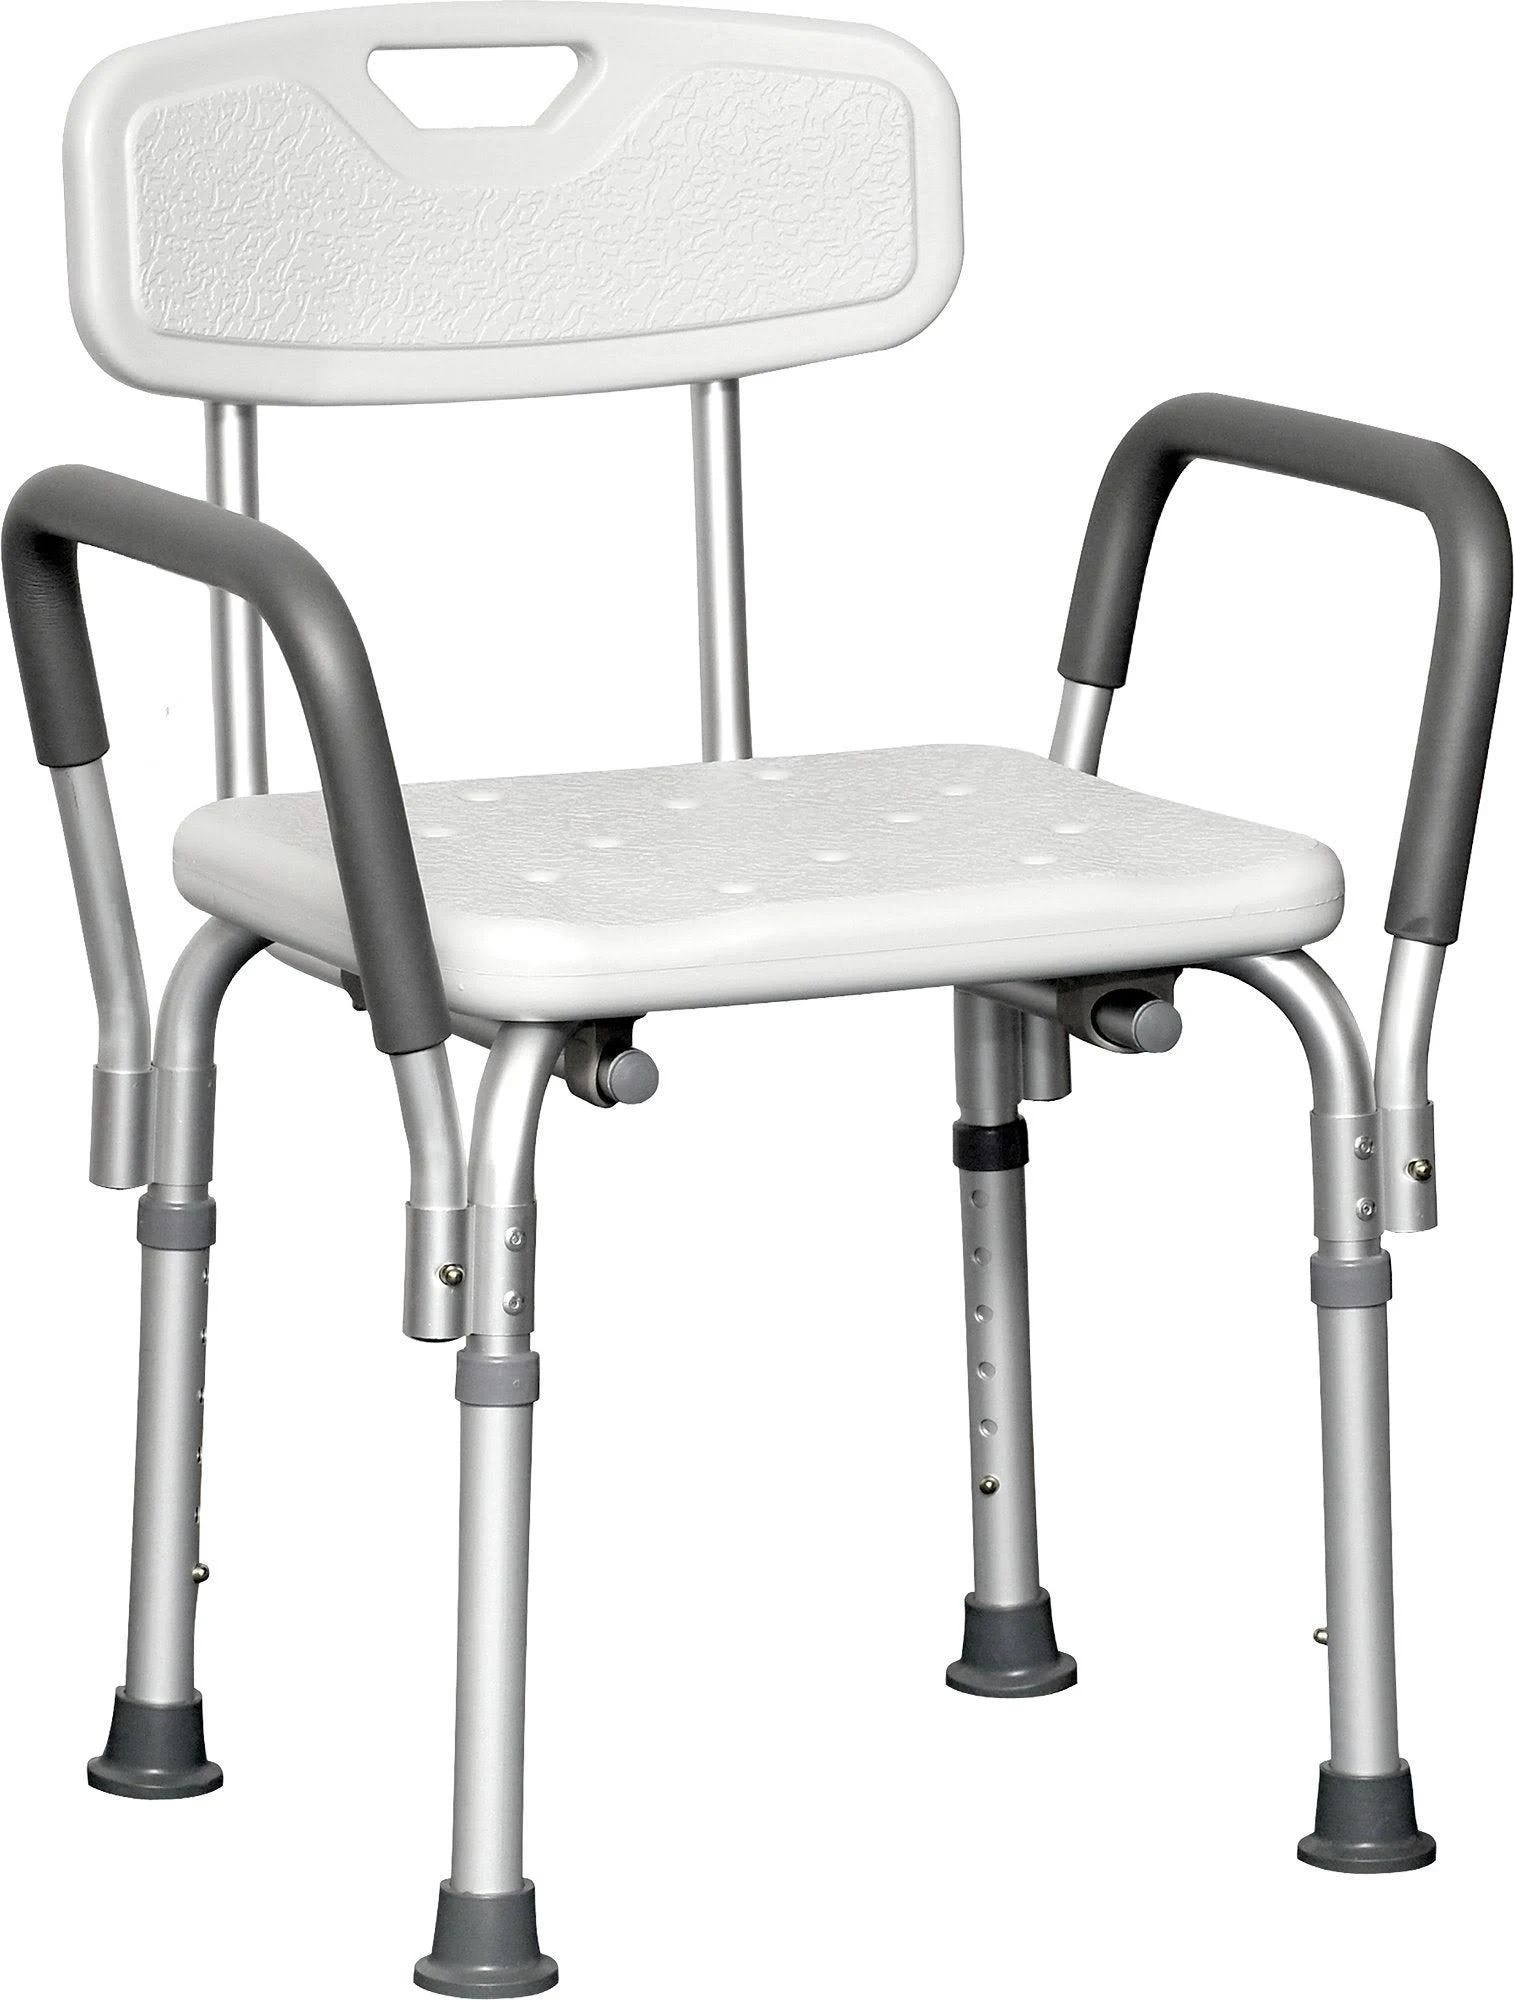 Comfortable Shower Chair with Adjustable Height and Removable Armrests | Image